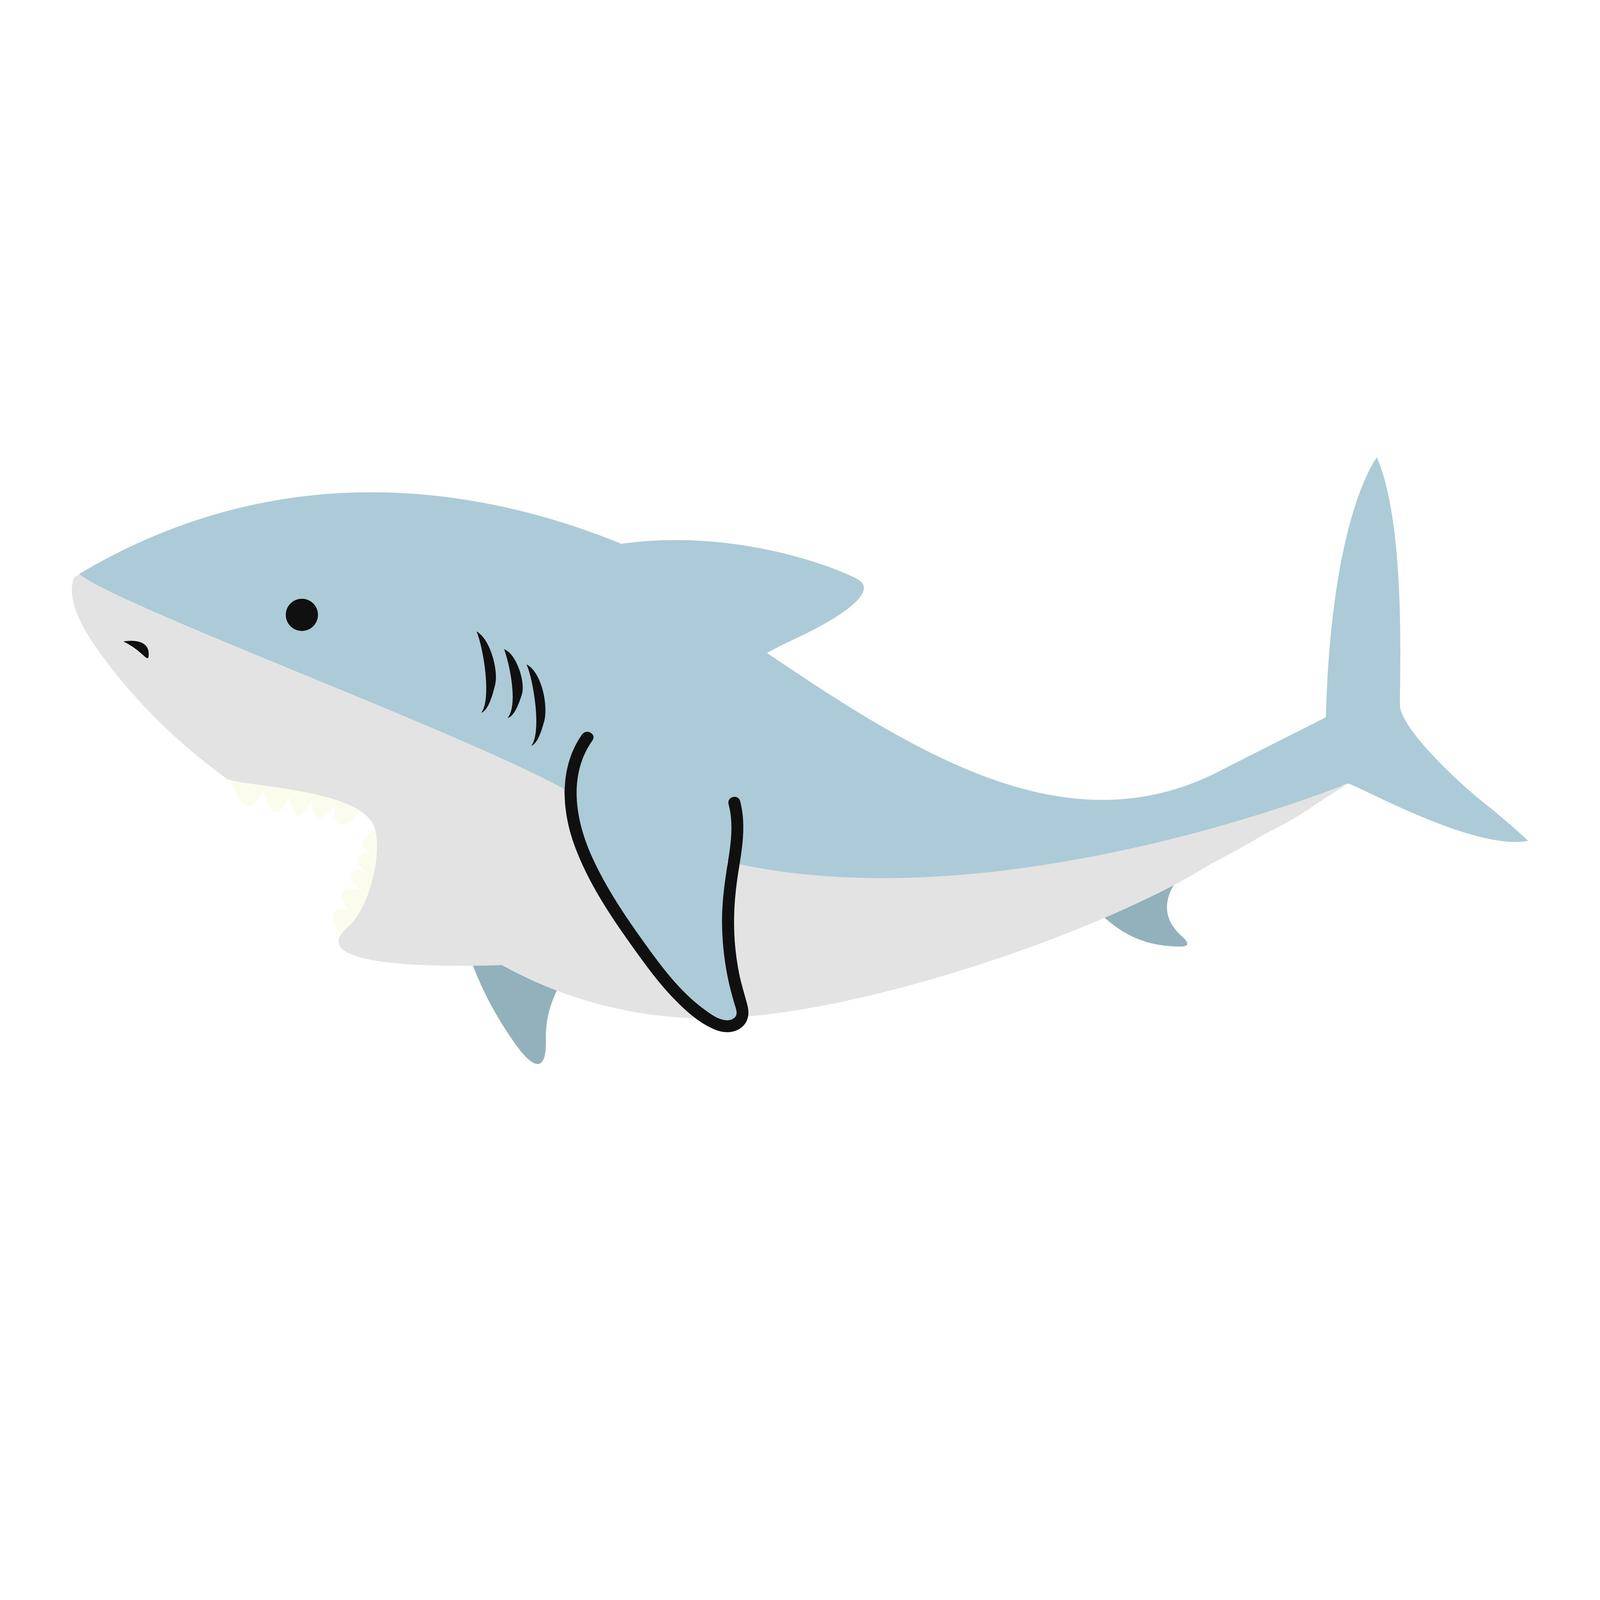 Cute White shark flat icon by focus_bell